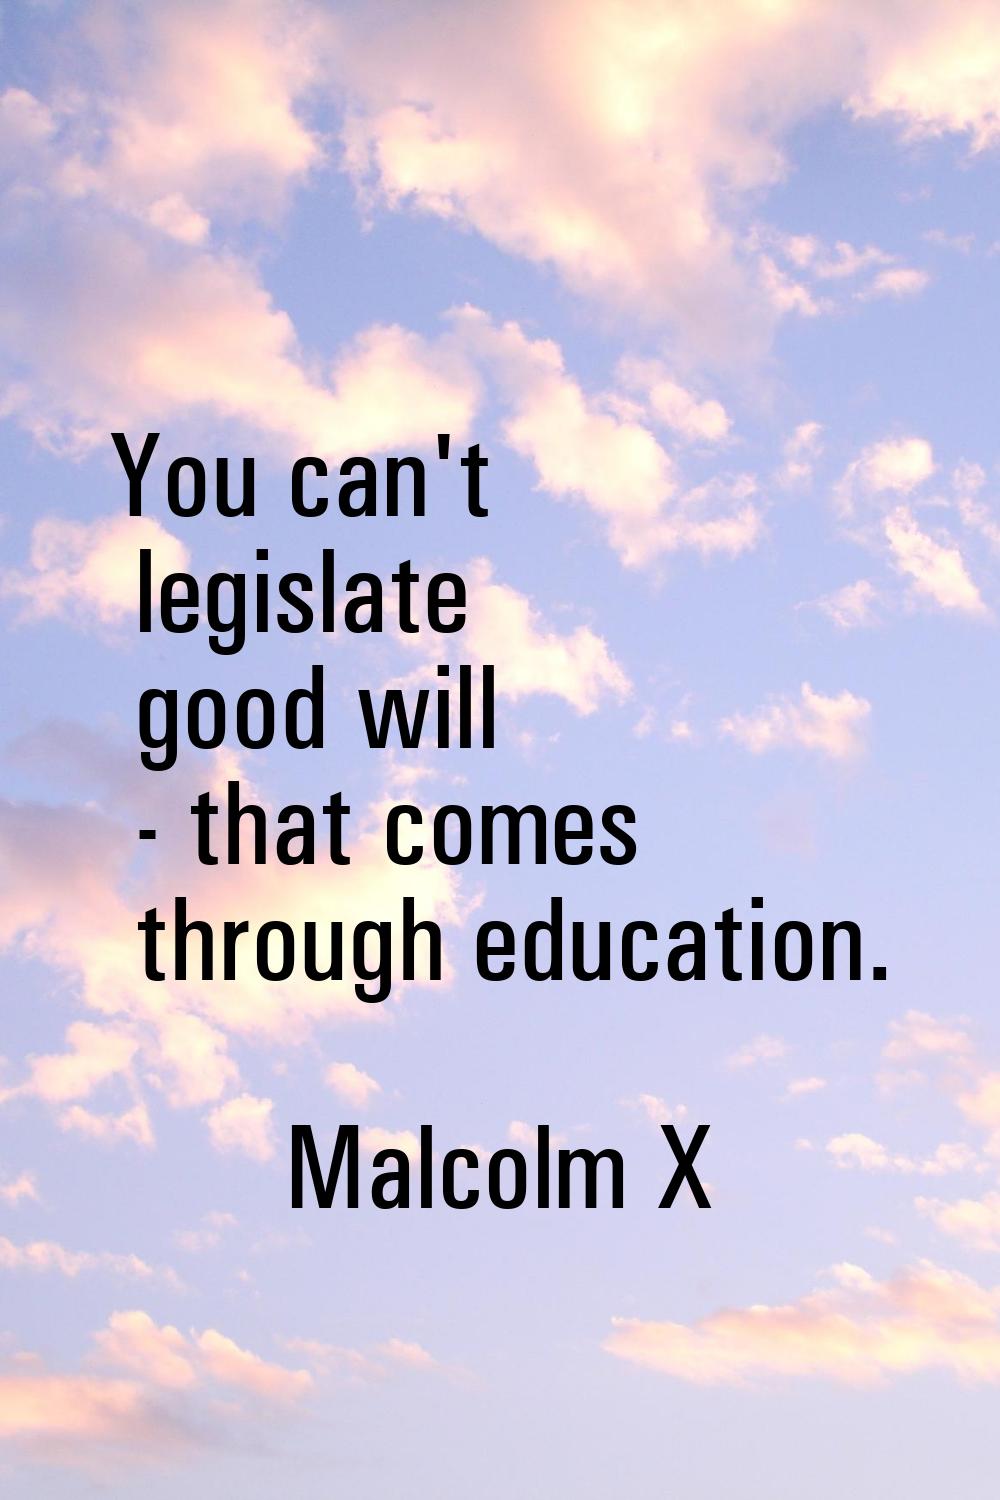 You can't legislate good will - that comes through education.